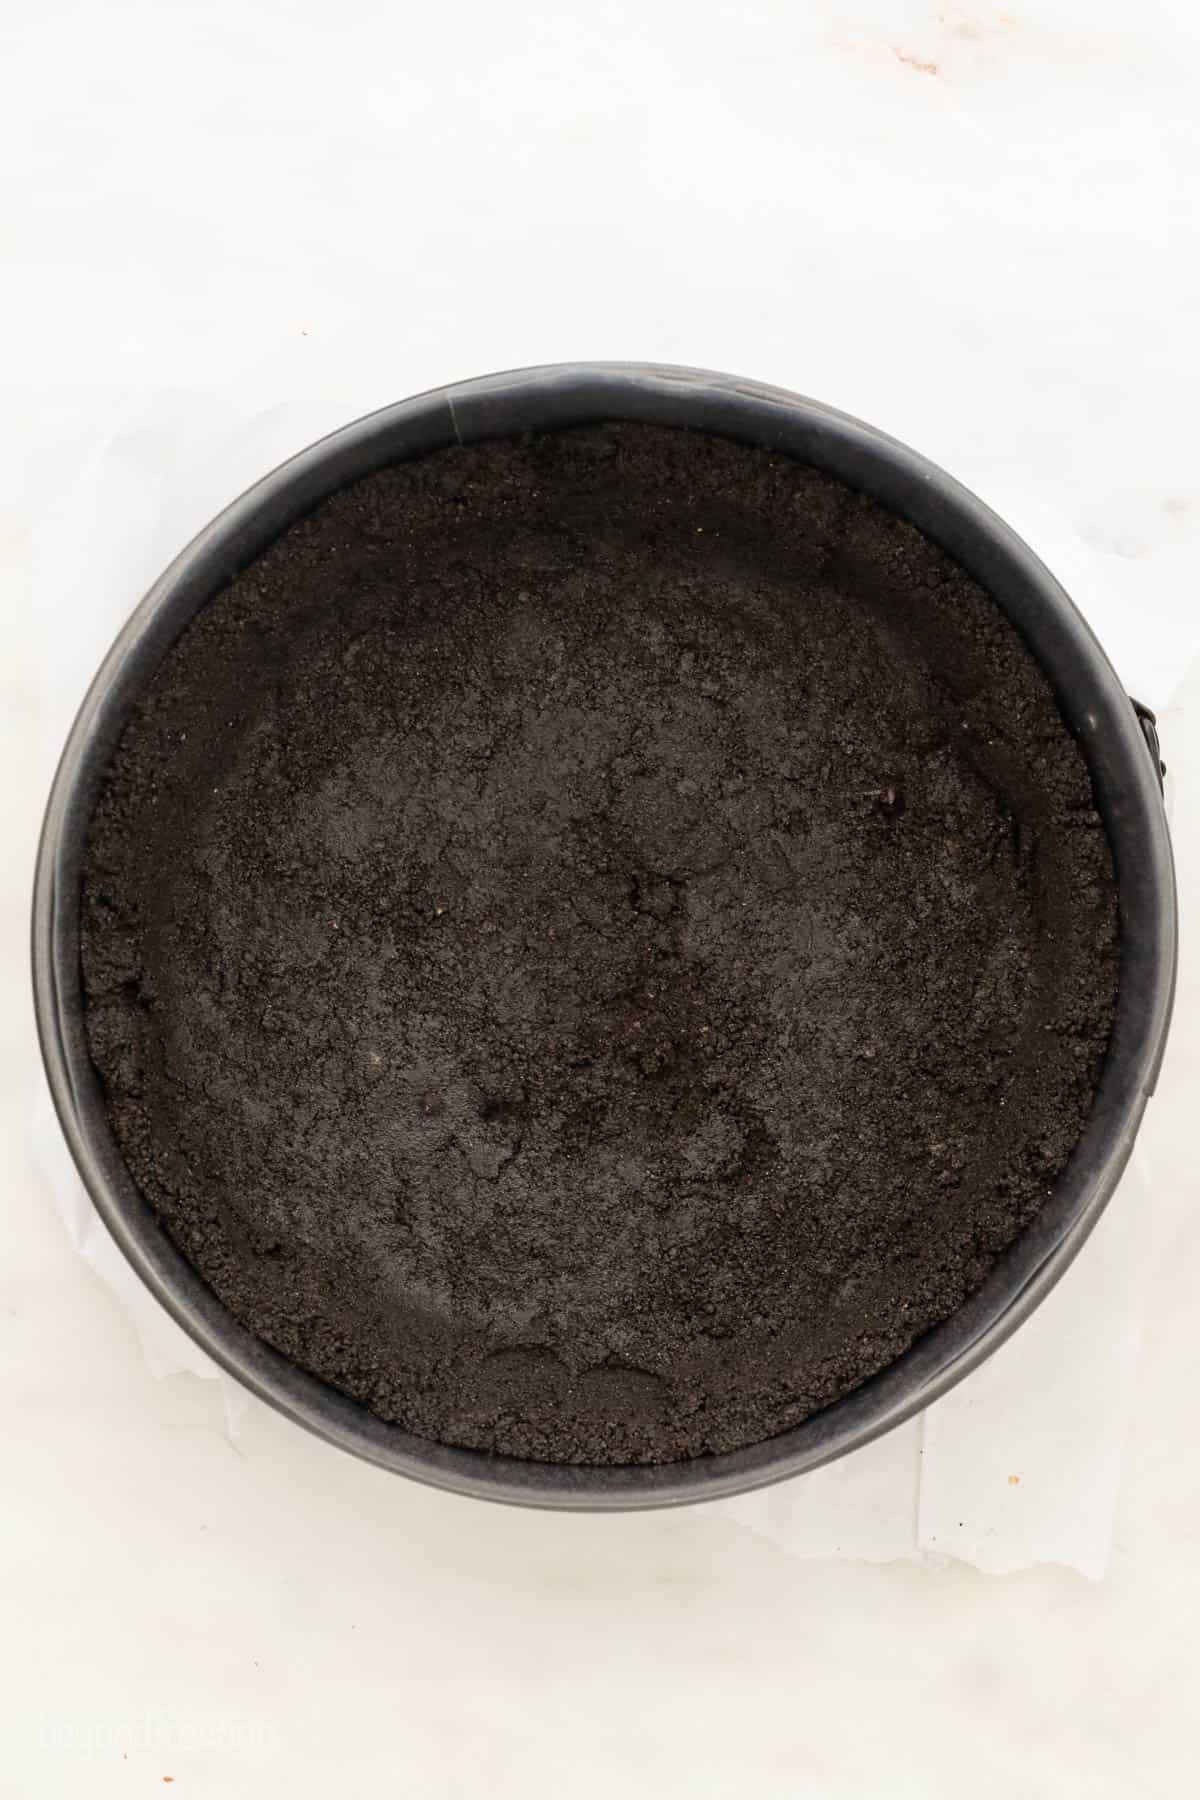 A Bird's Eye View of an Oreo Cookie Crust Pressed Into a springform pan